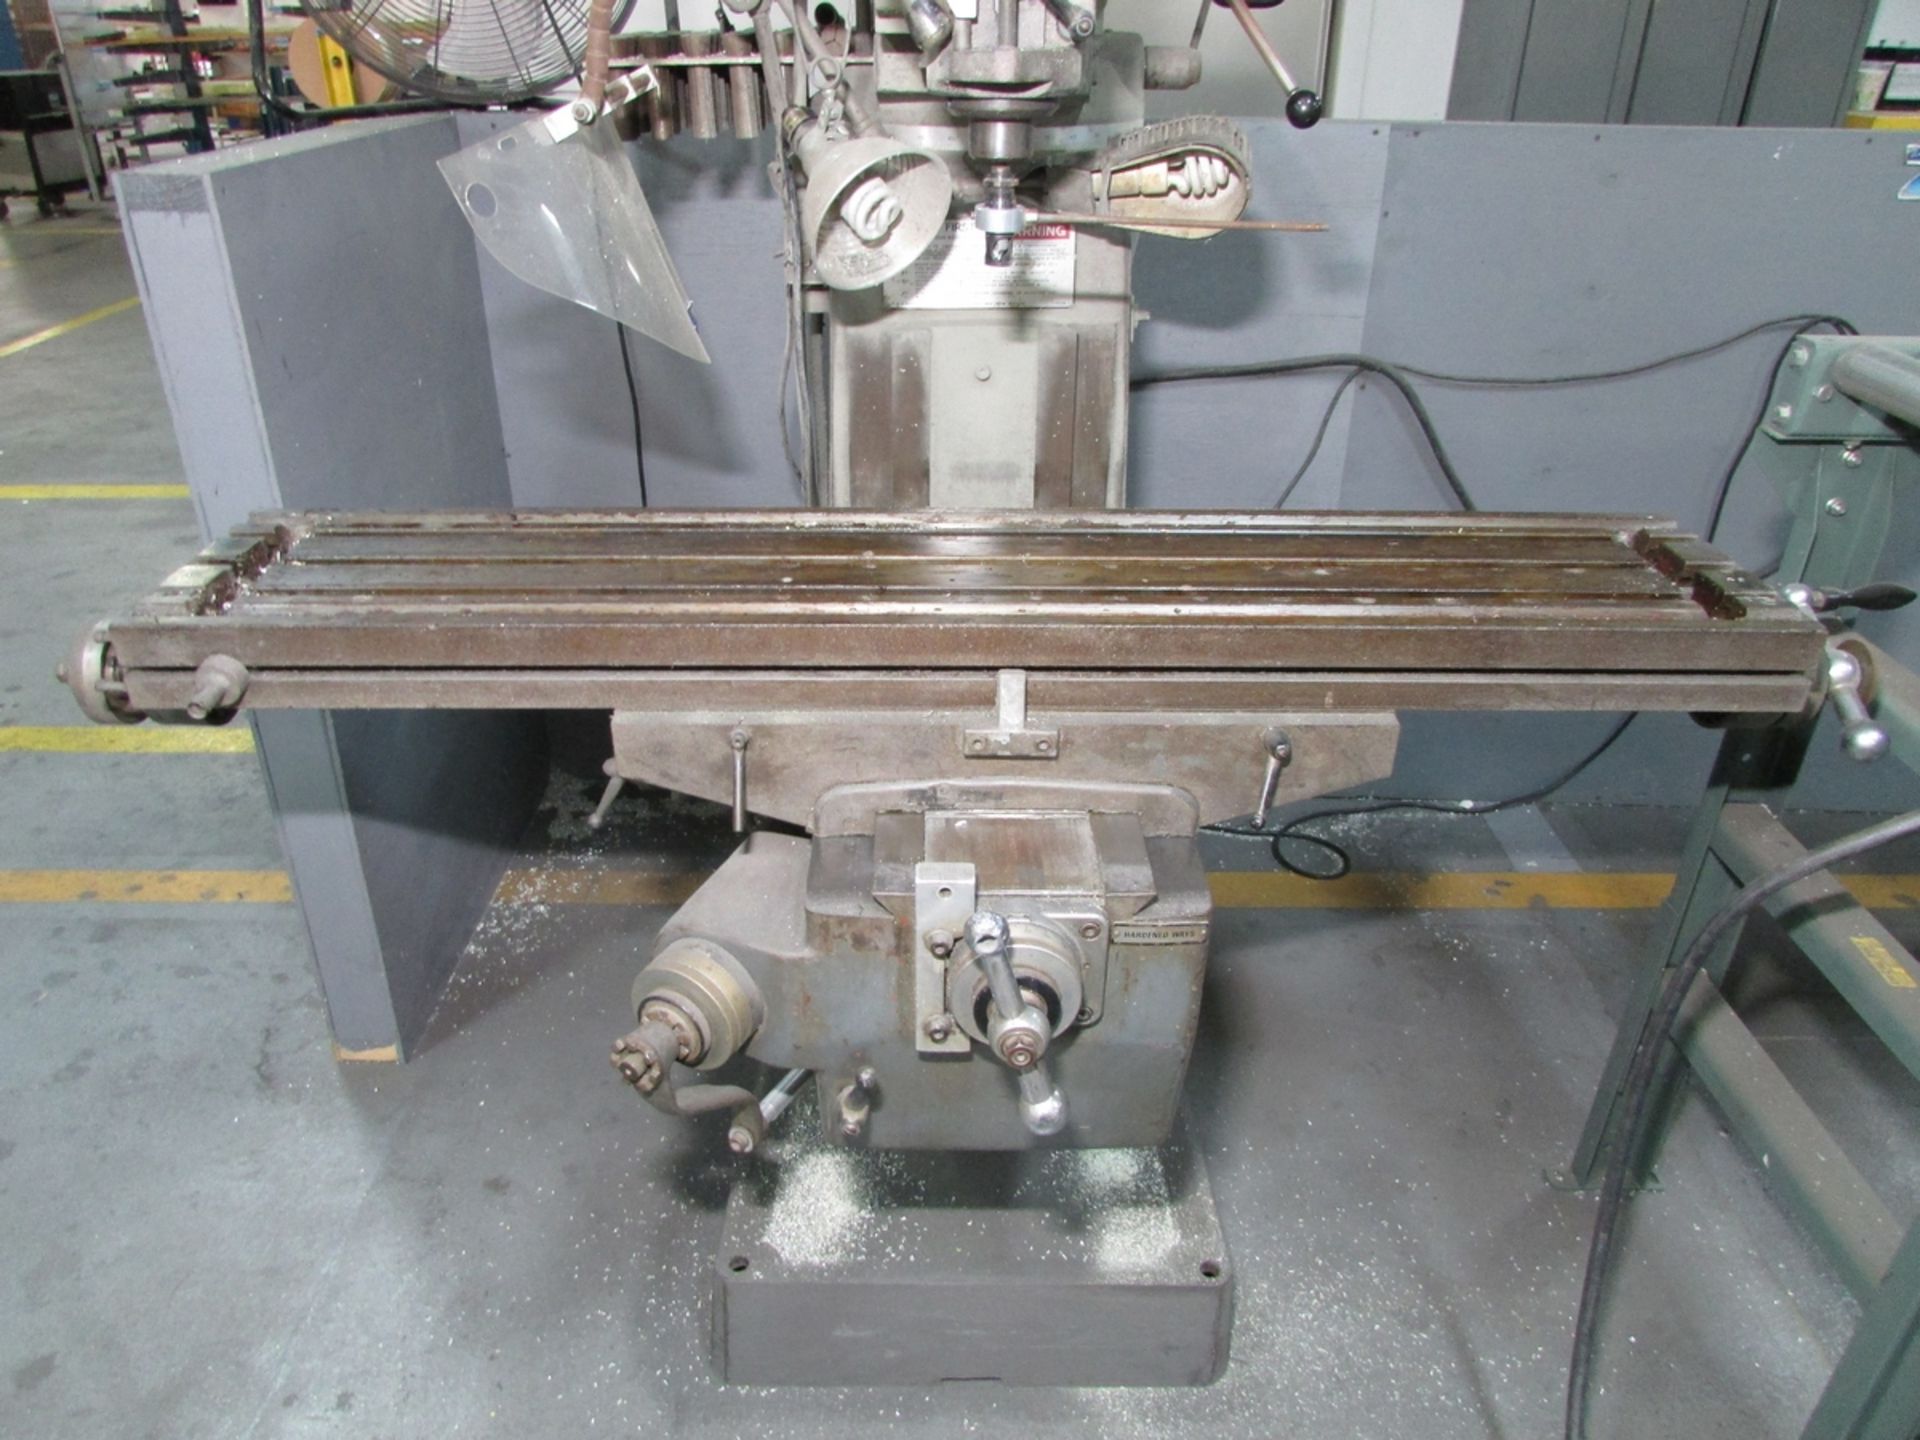 LAGUN REPUBLIC VERTICAL MILLING MACHINE, 50" X 10" T-SLOTTED TABLE, 5" QUILL STROKE, 55-2940 RPM - Image 8 of 13